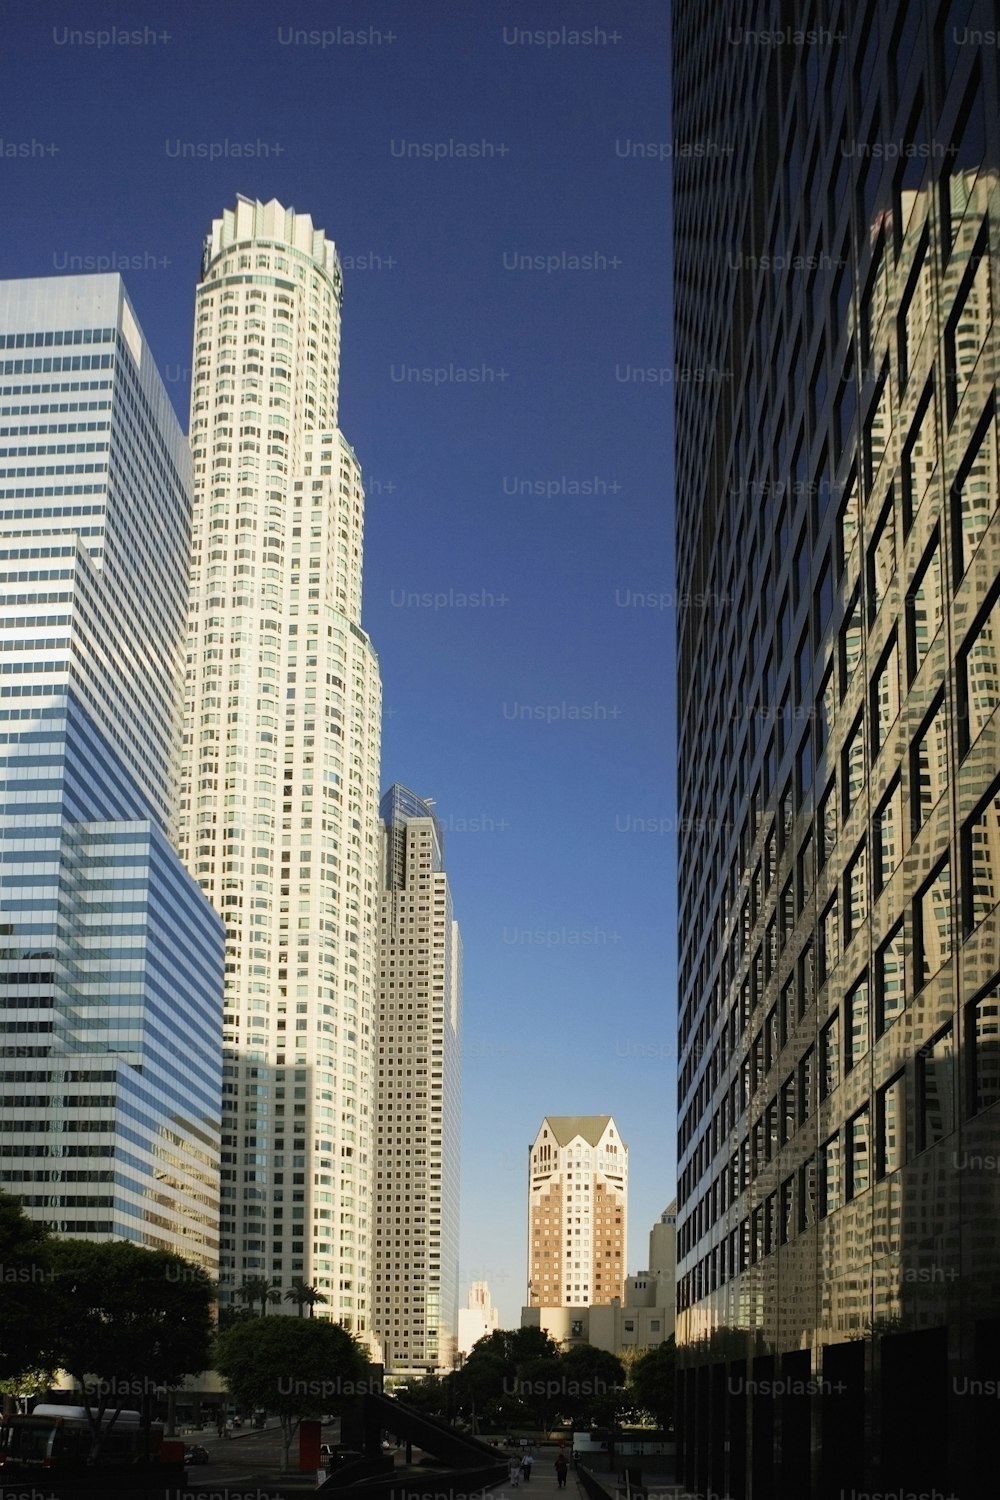 a city street with tall buildings in the background